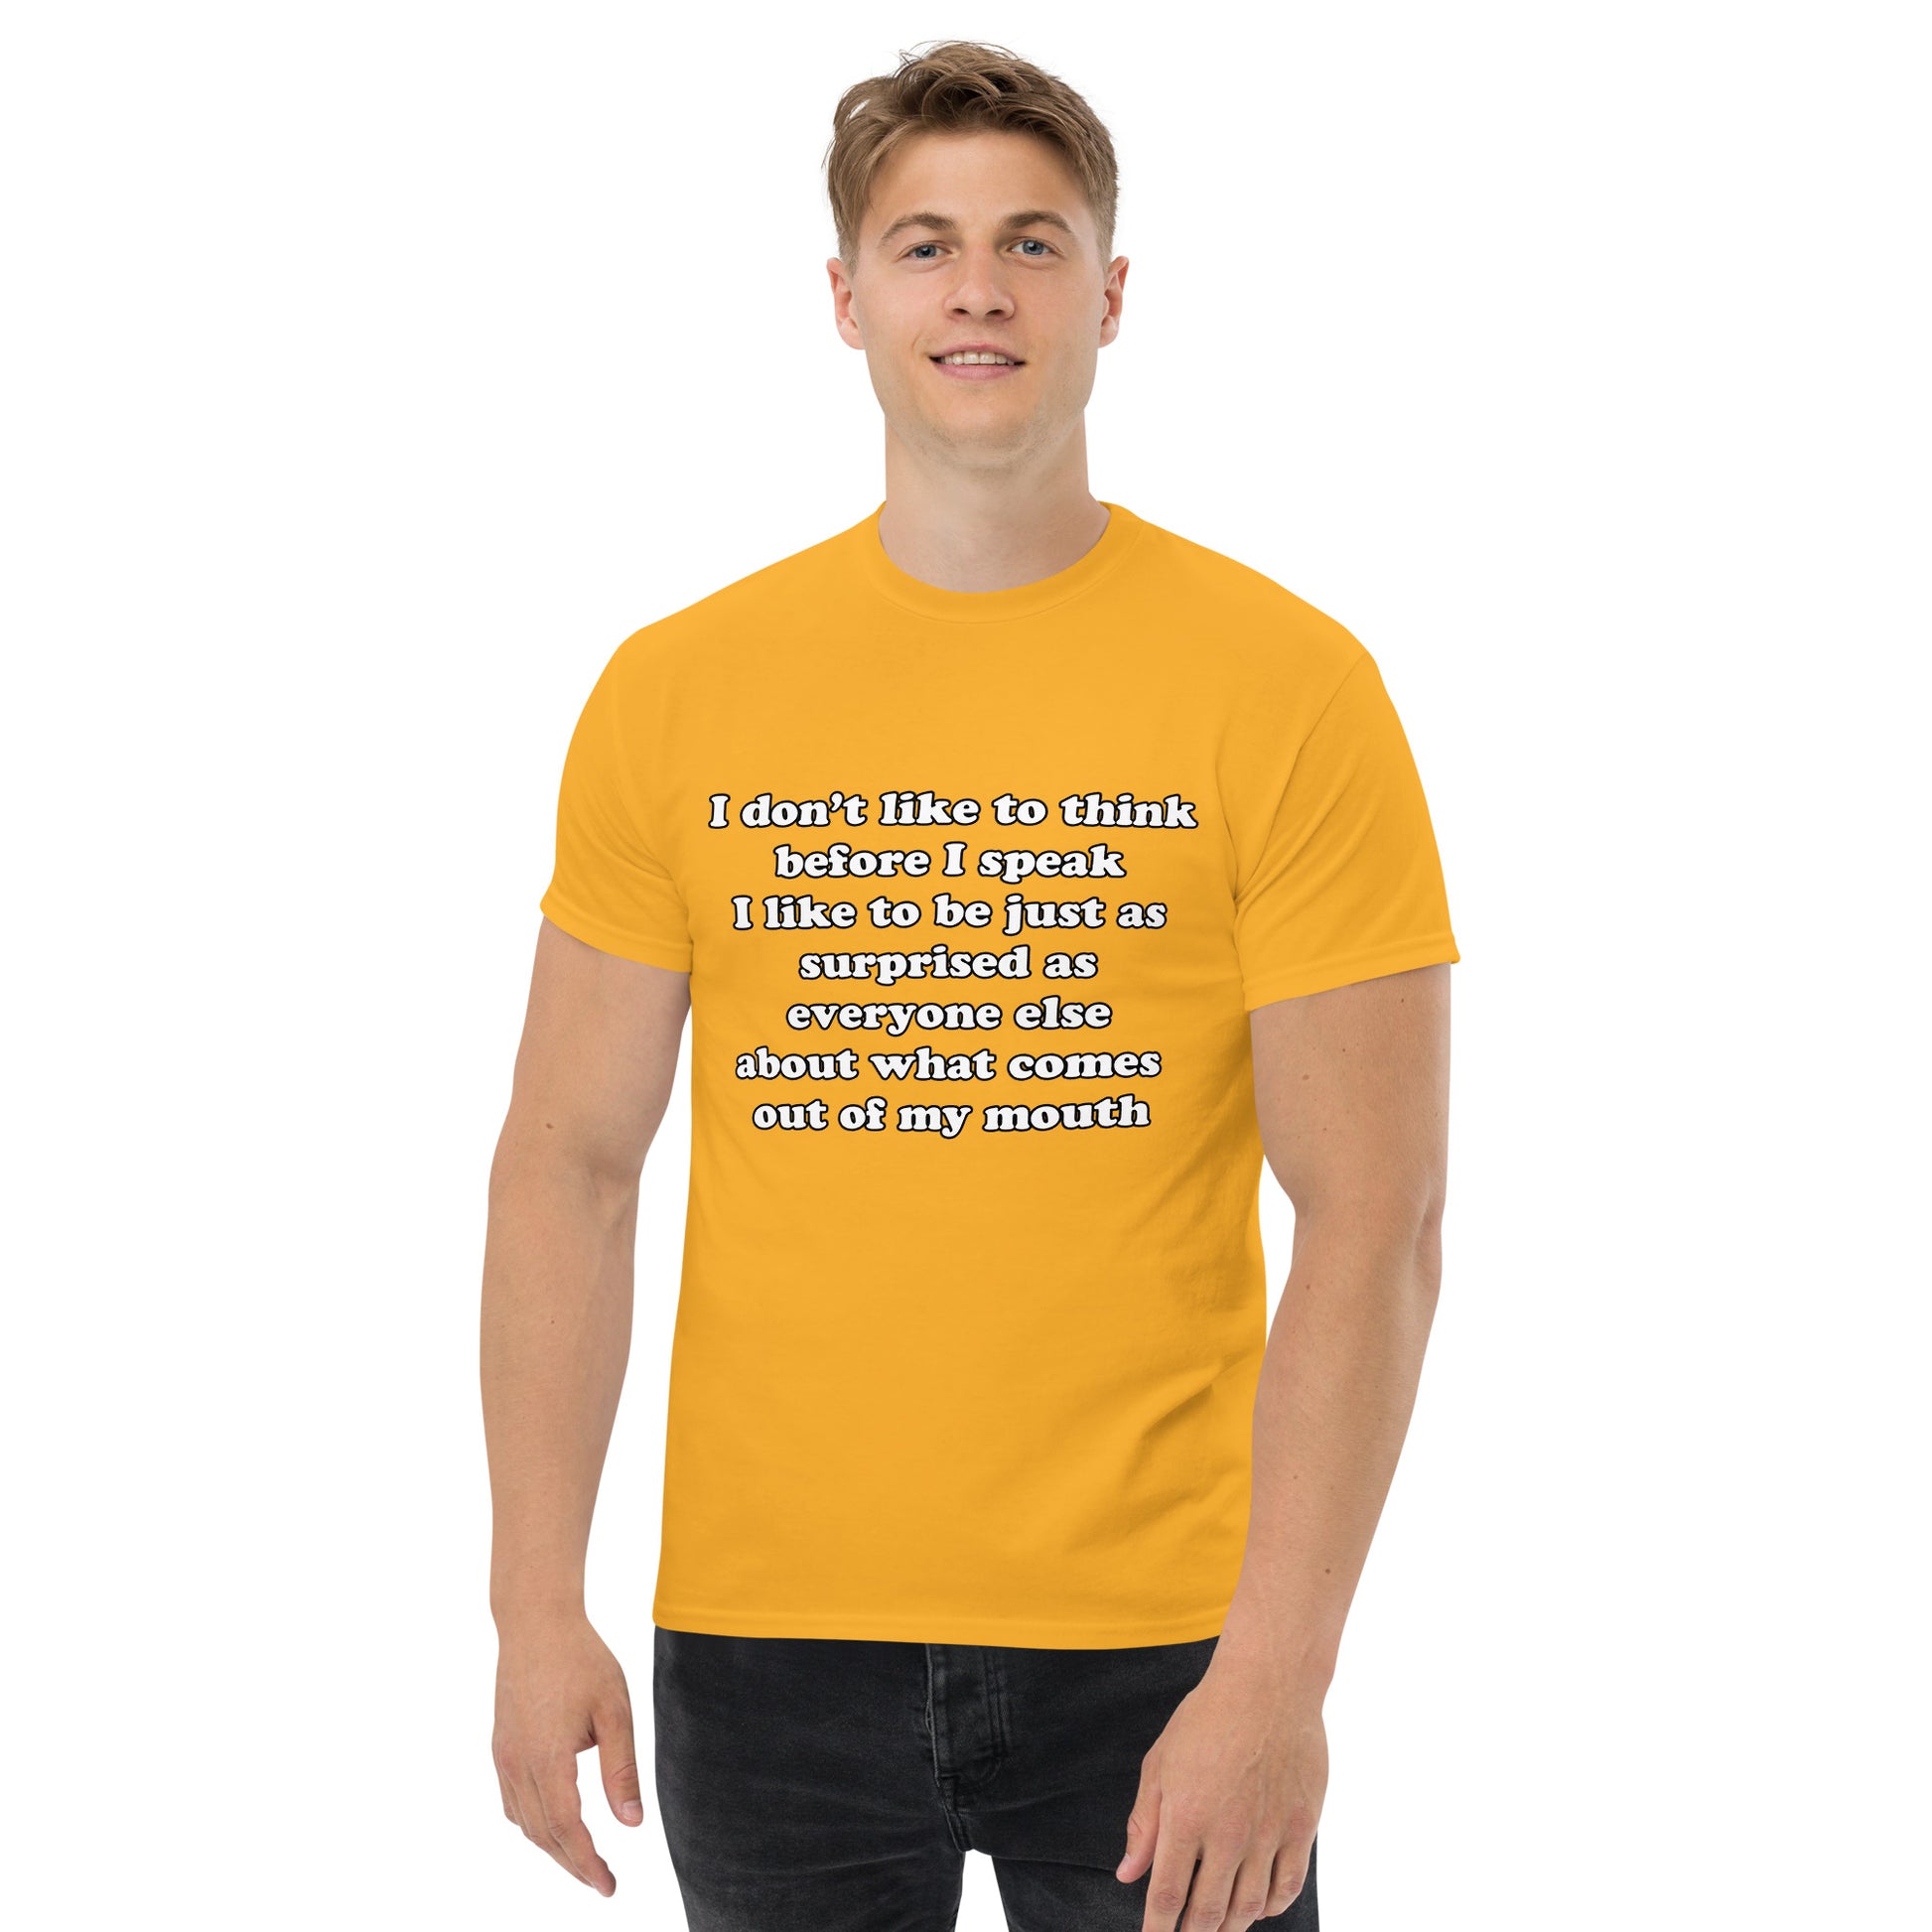 Man with gold t-shirt with text “I don't think before I speak Just as serprised as everyone about what comes out of my mouth"